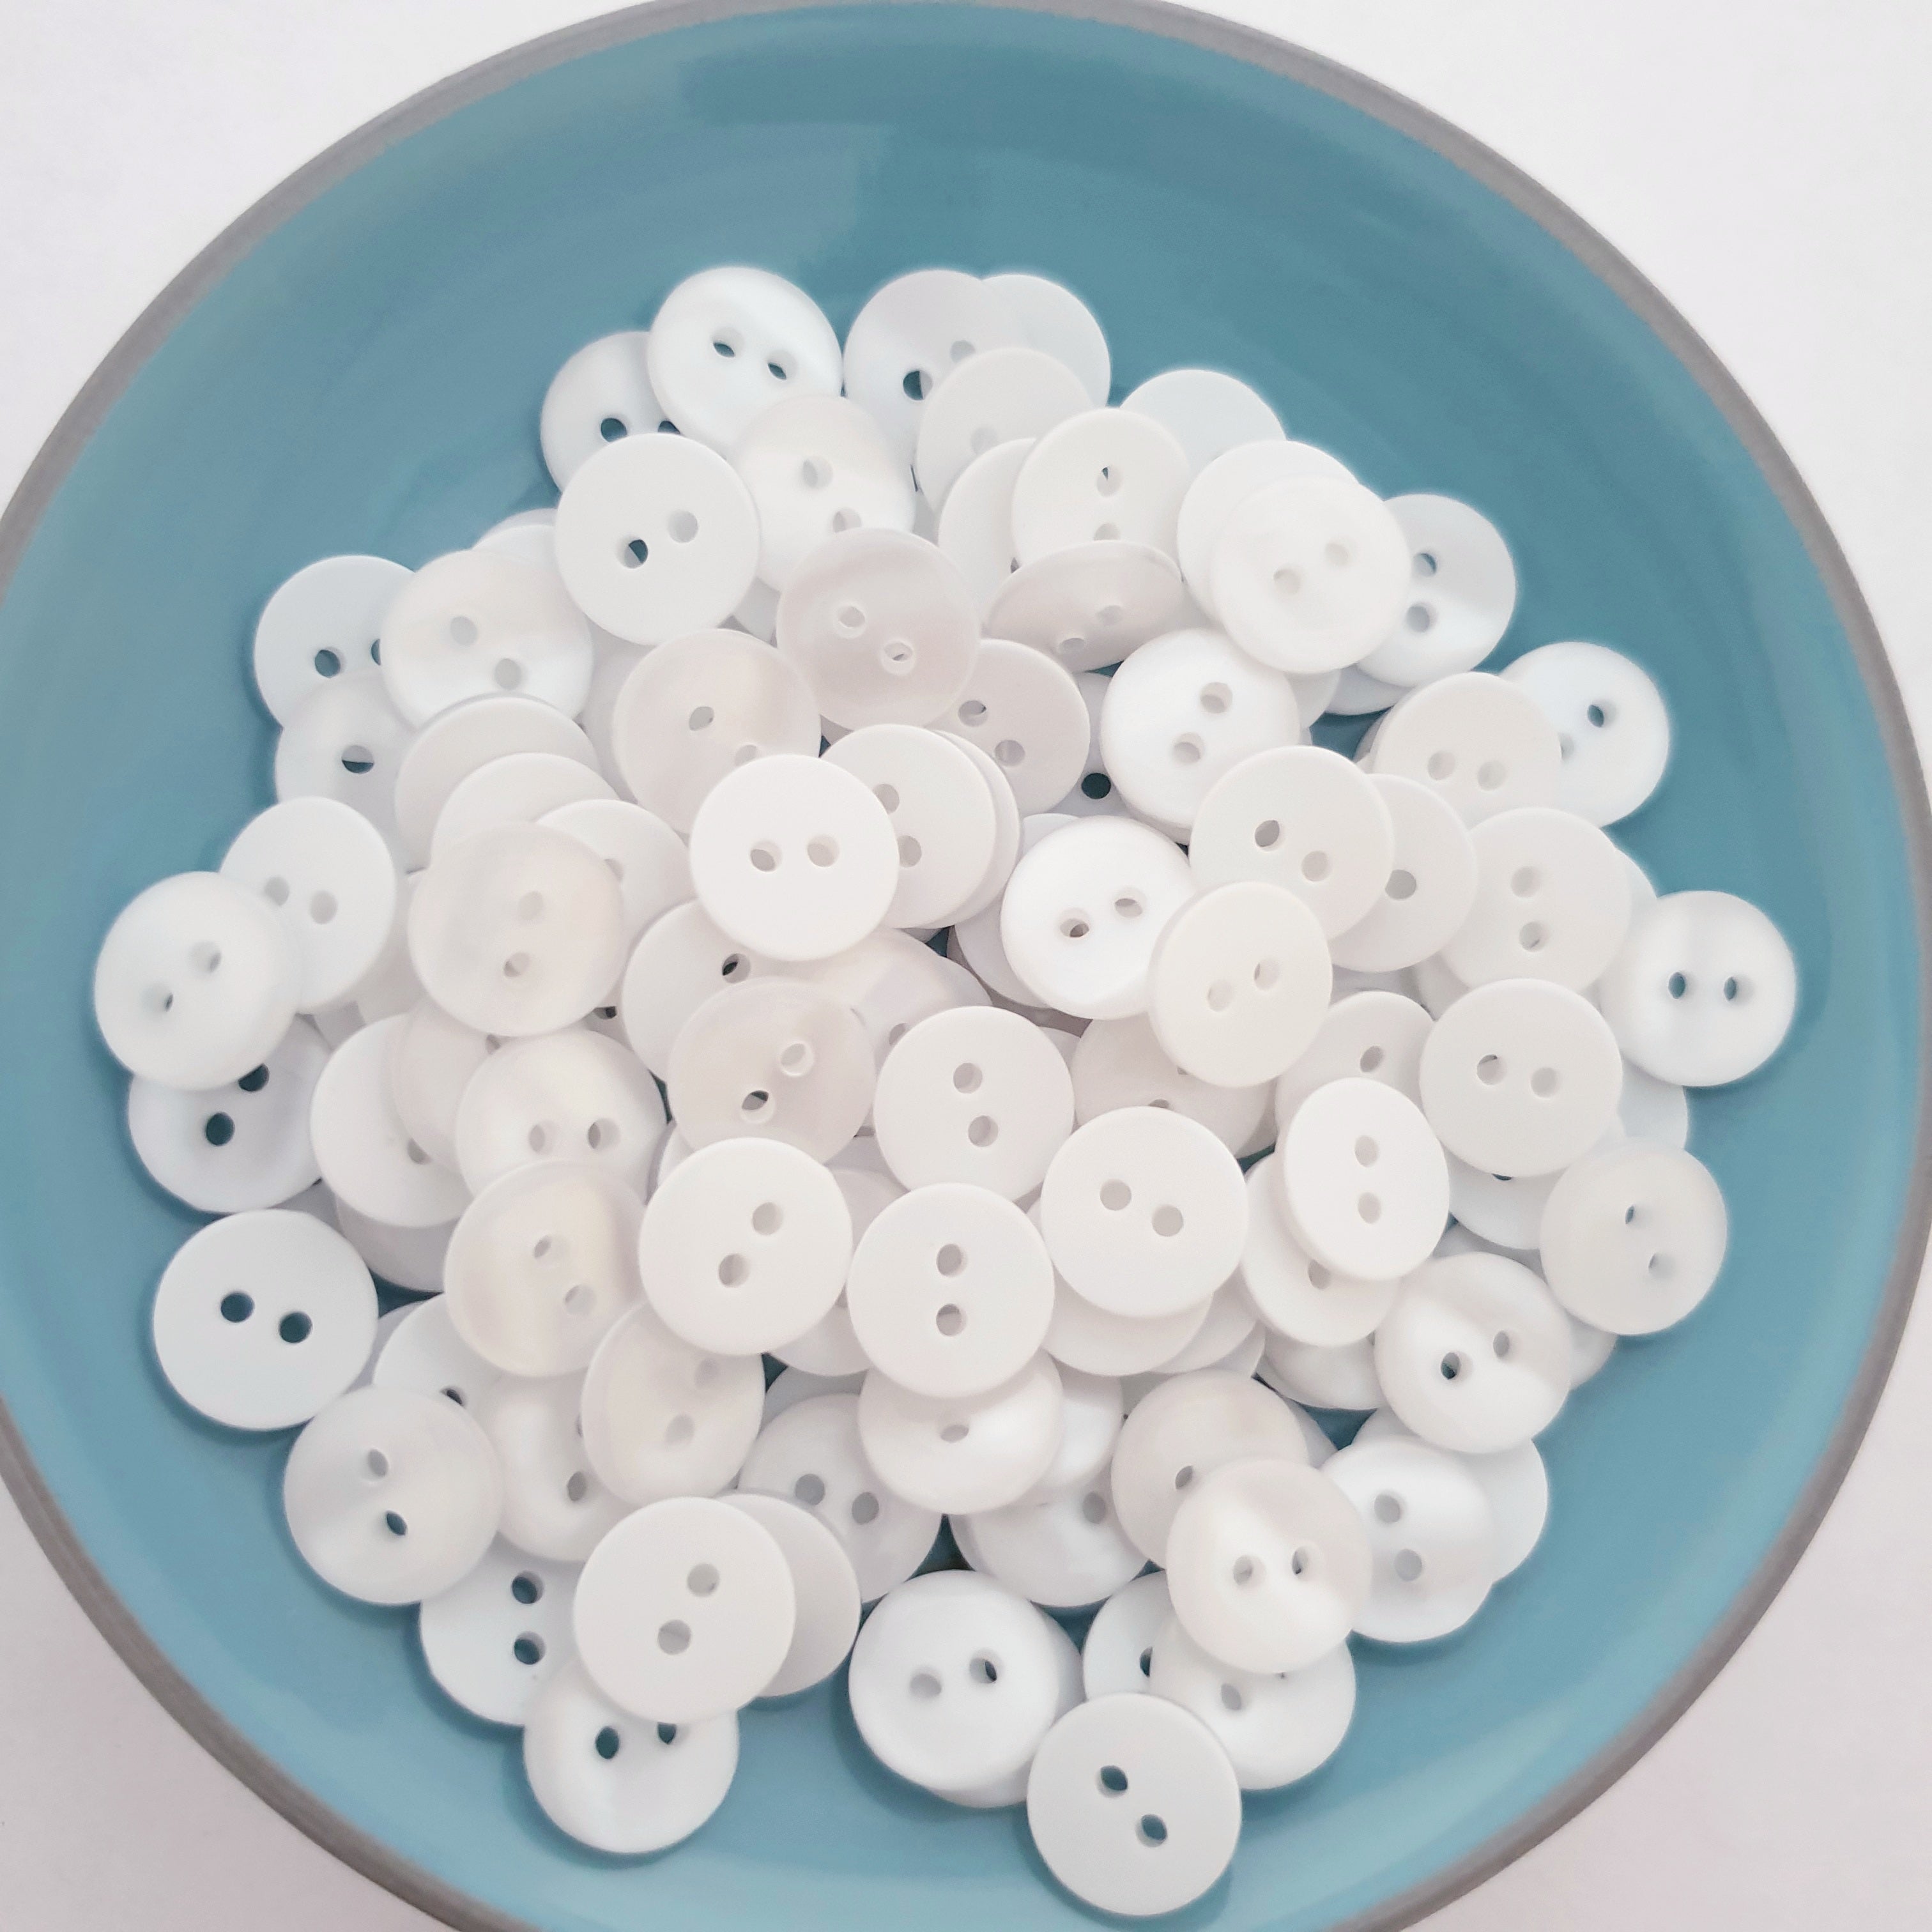 MajorCrafts 80pcs 10mm White Pearlescent 2 Holes Small Round Resin Sewing Buttons